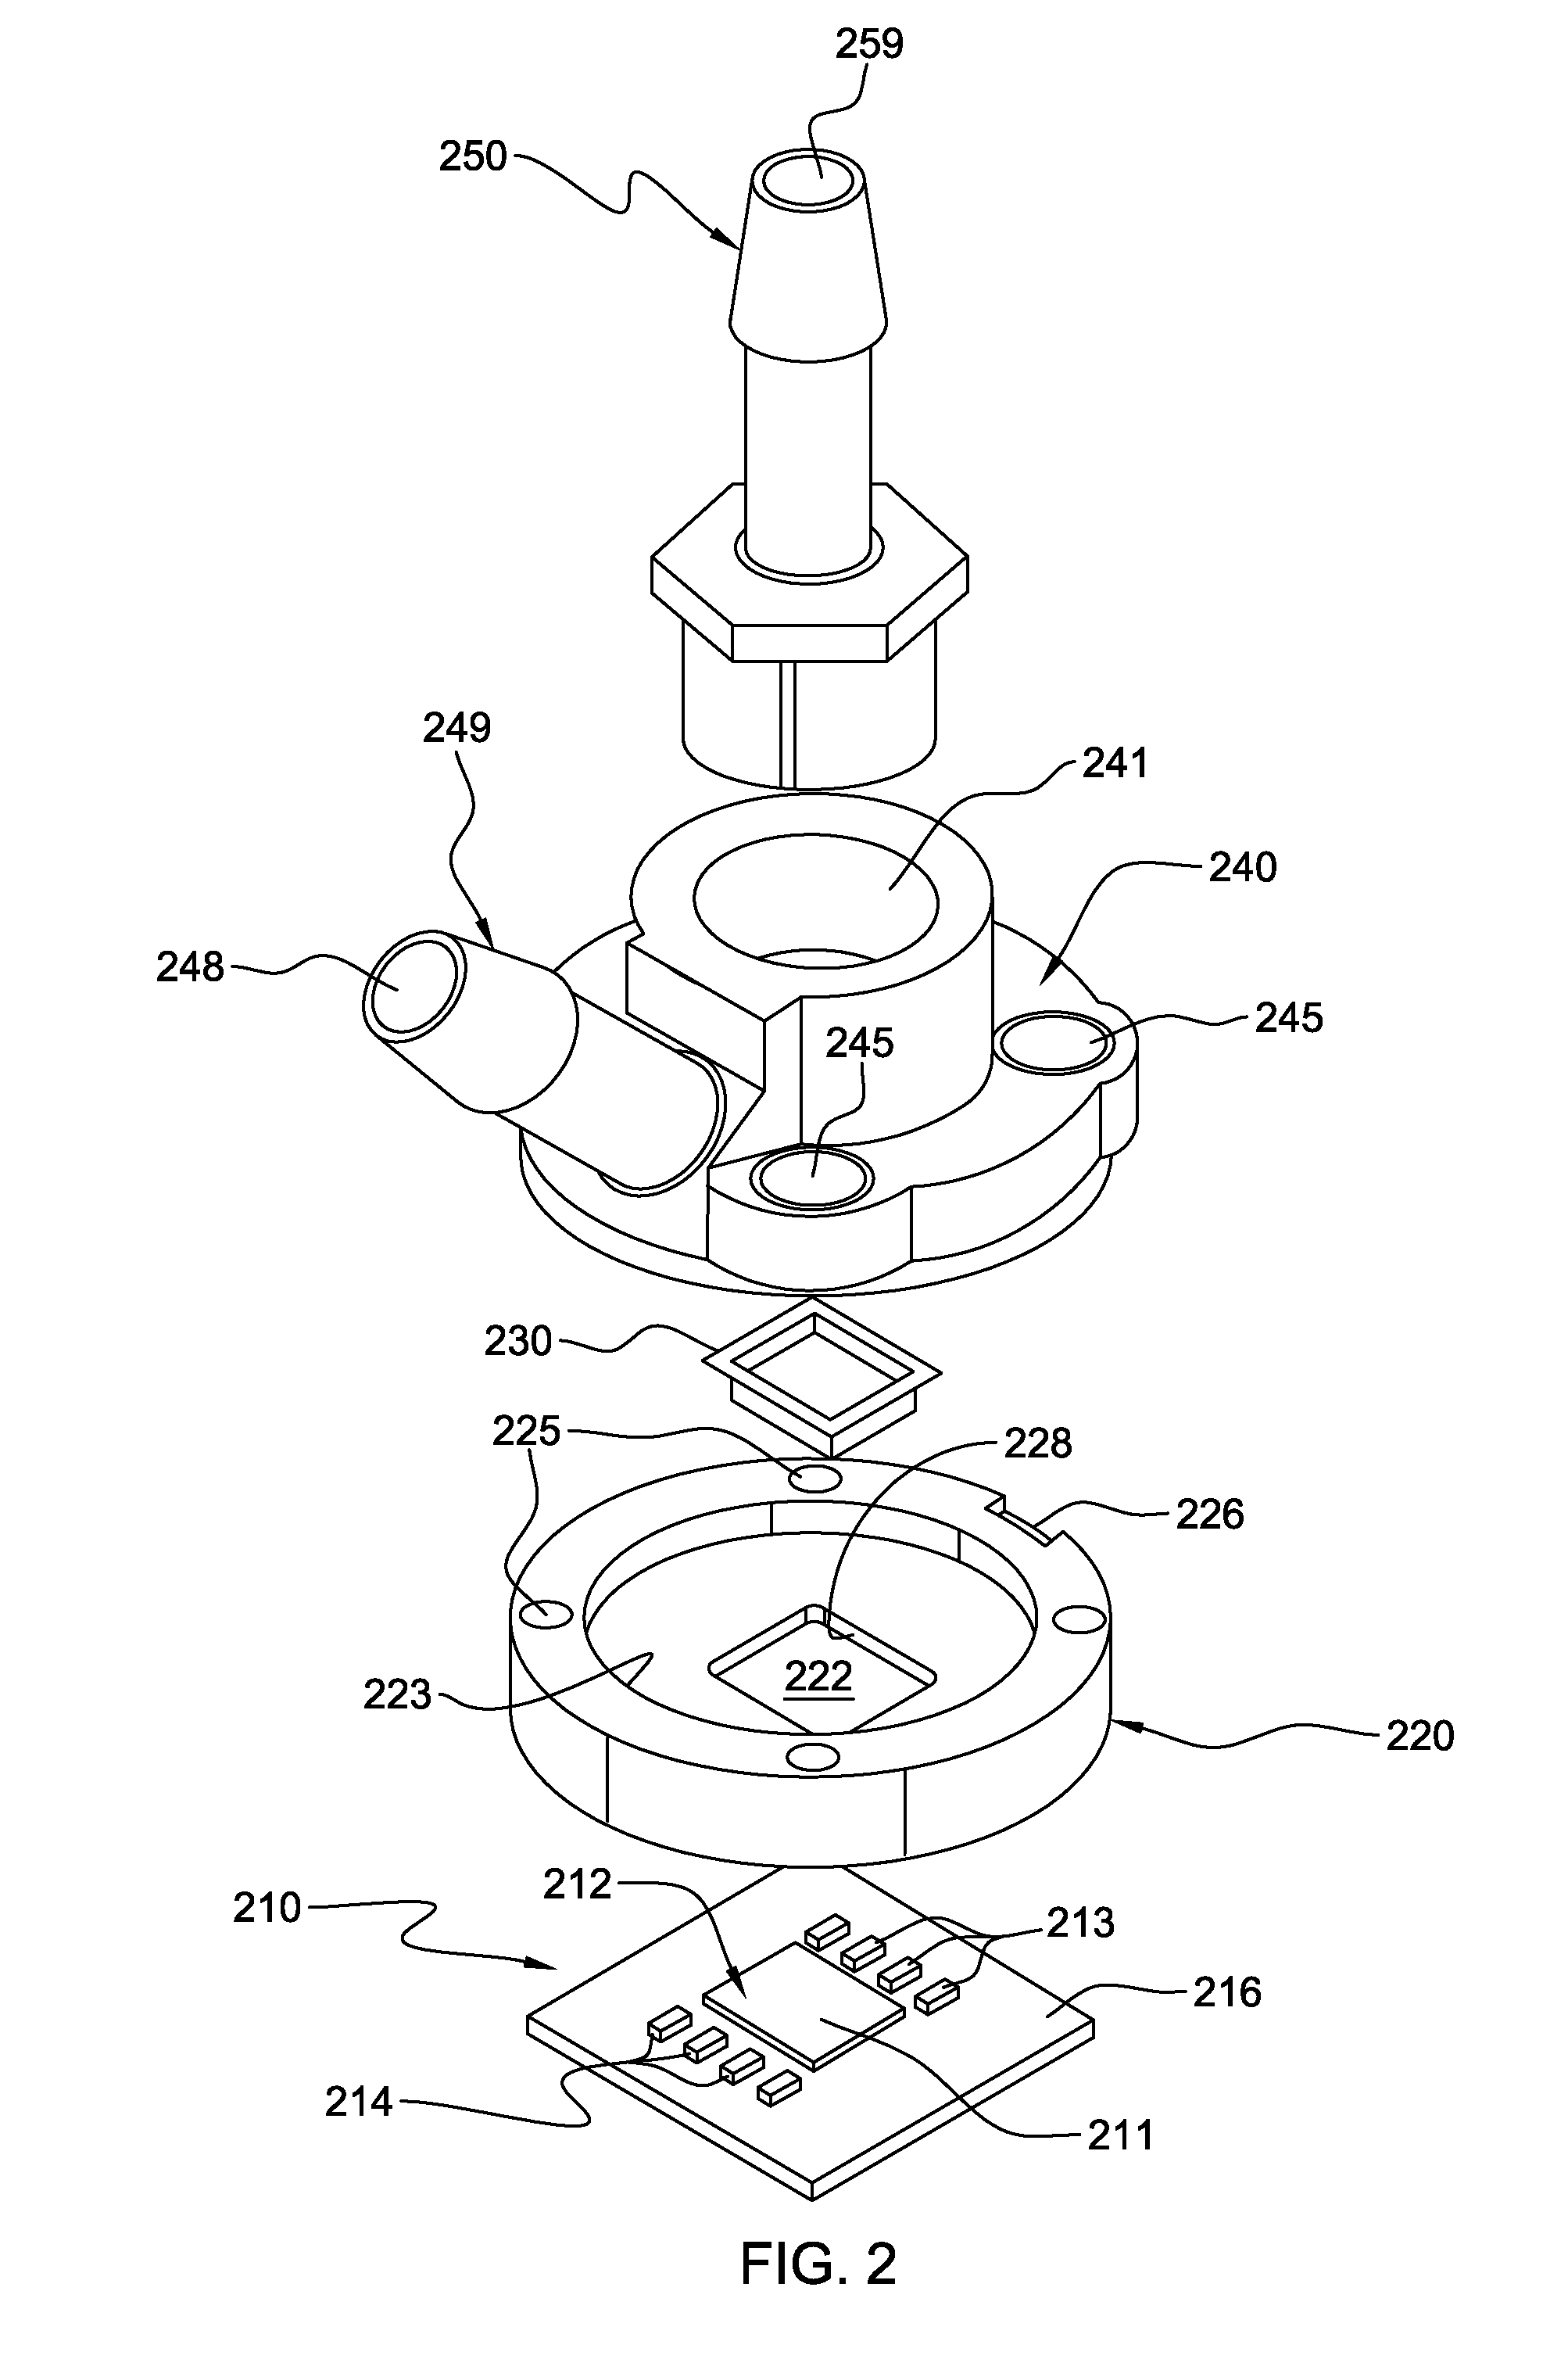 Direct jet impingement-assisted thermosyphon cooling apparatus and method